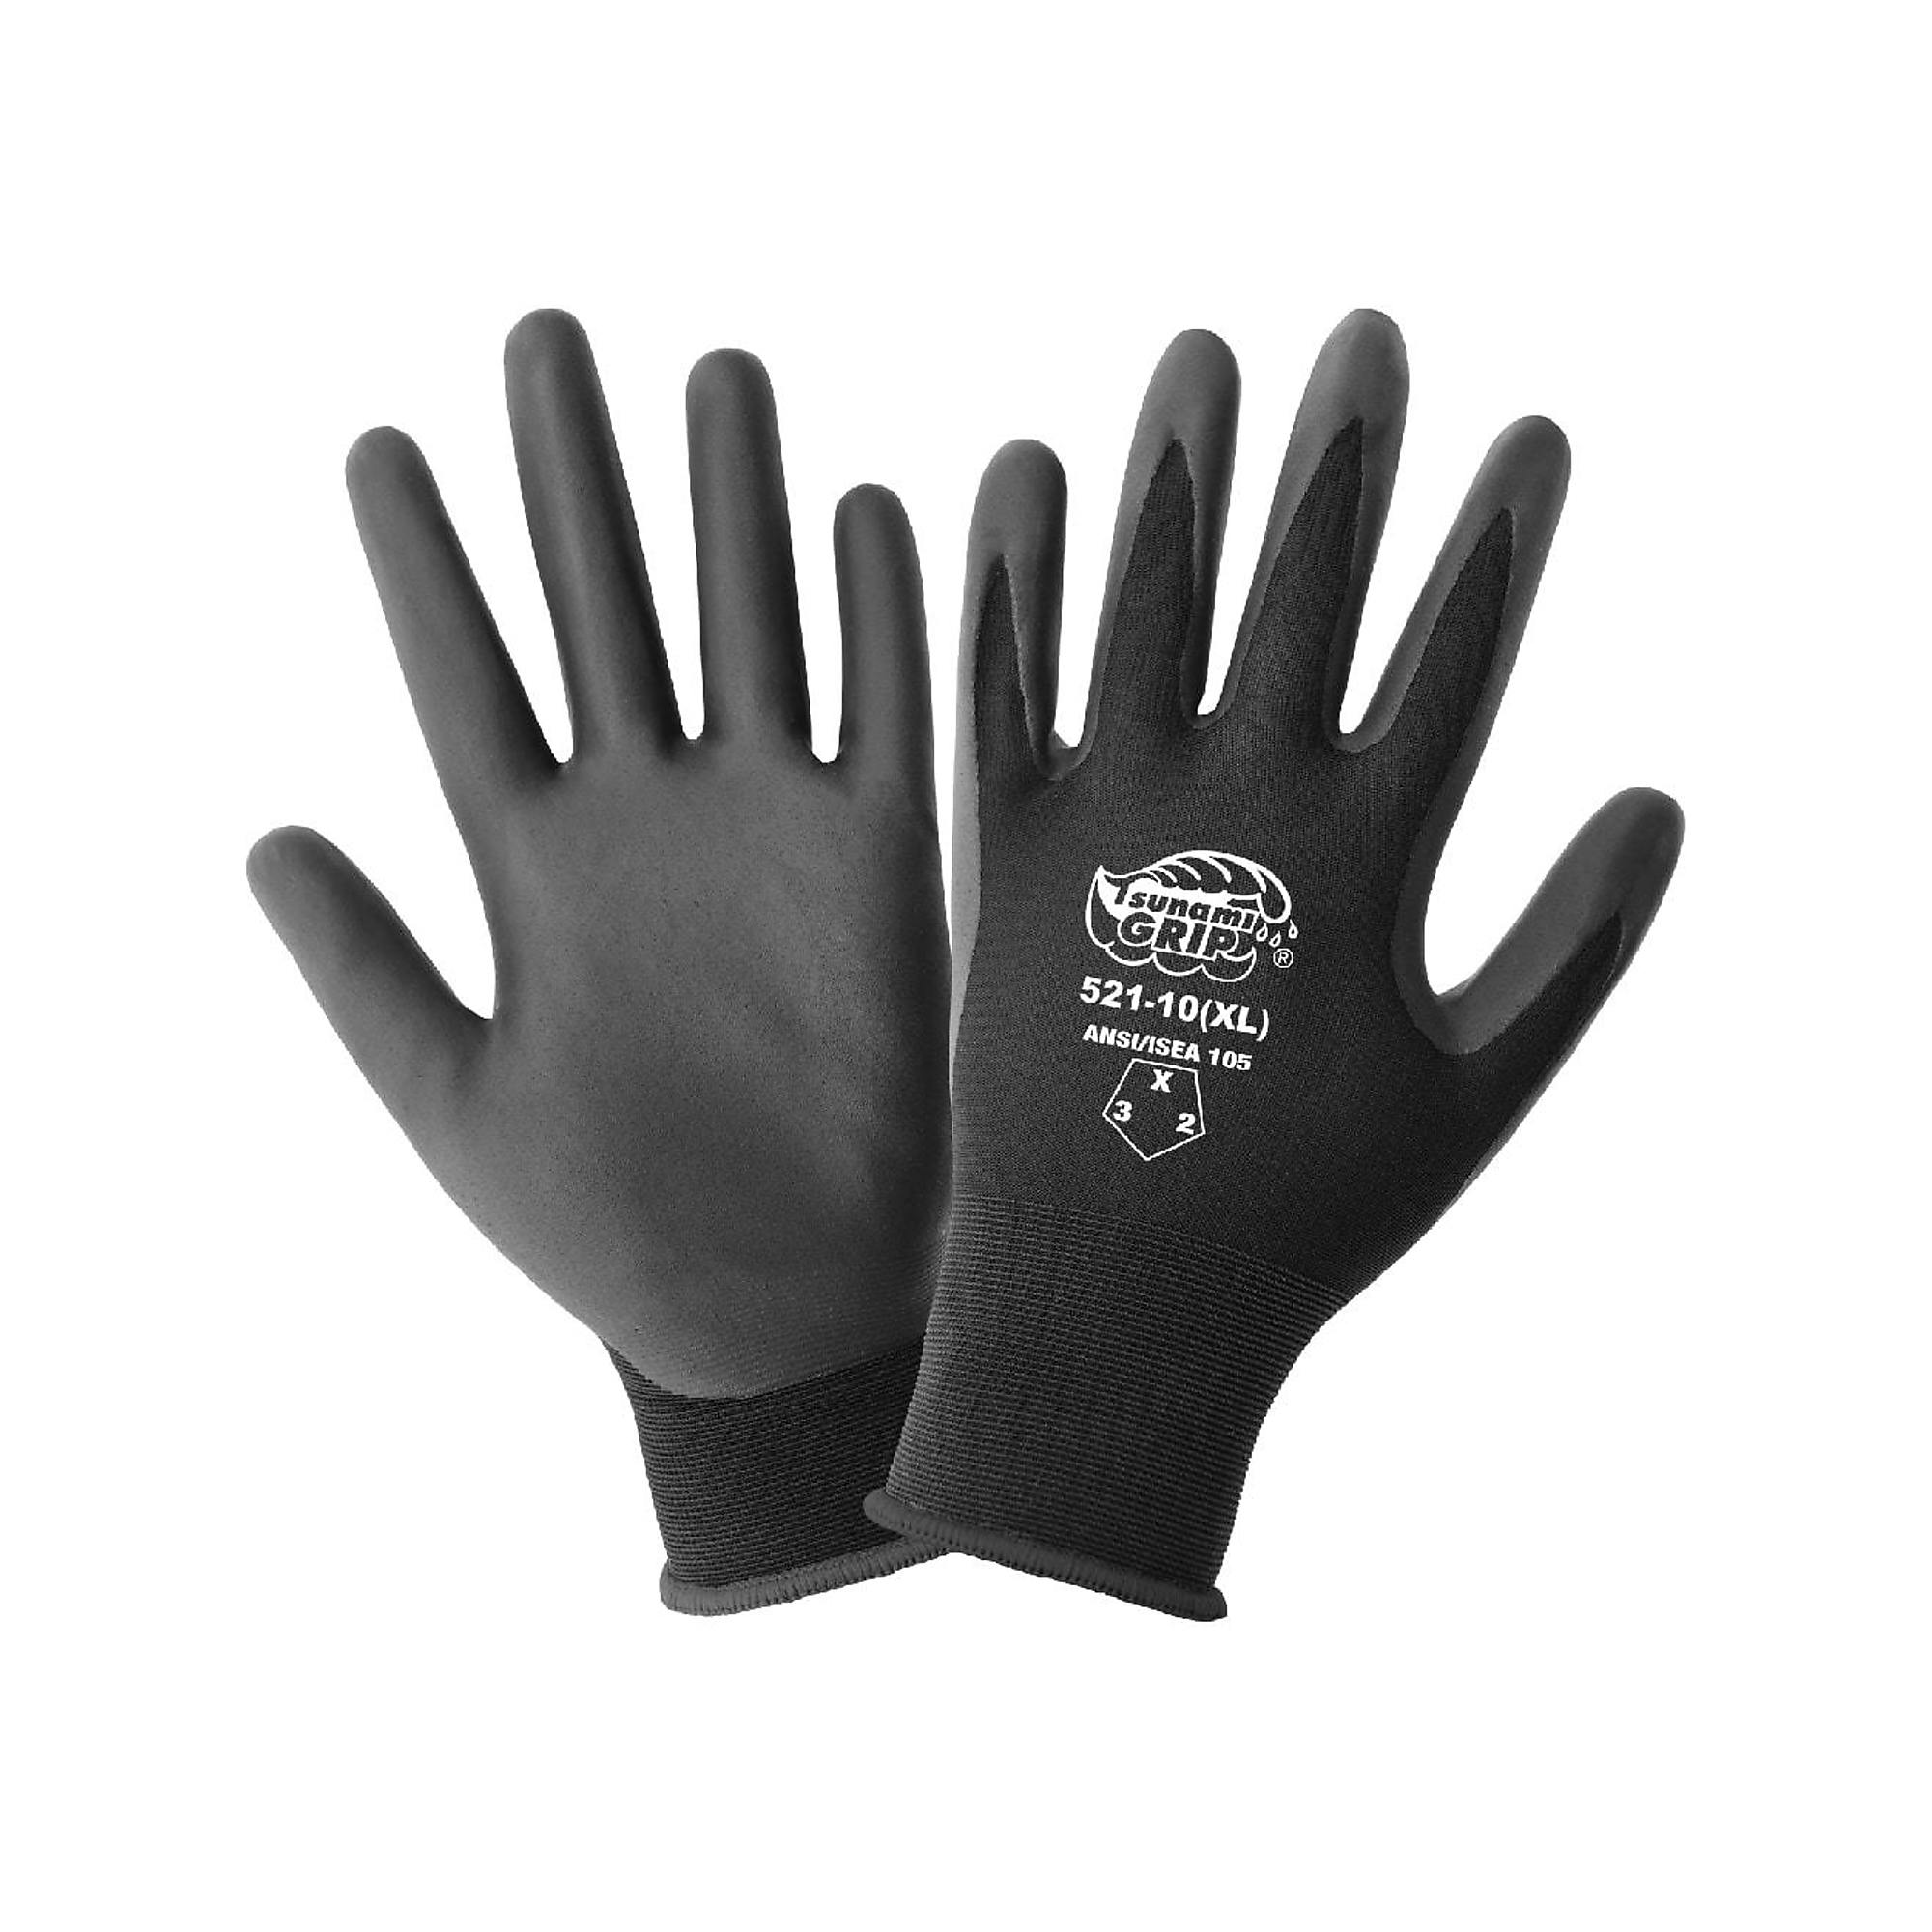 Global Glove Tsunami Grip , Tsunami Grip FDA Nitrile Coated 21-Gauge Gloves - 12 Pairs, Size S, Color Black, Included (qty.) 12 Model 521-7(S)